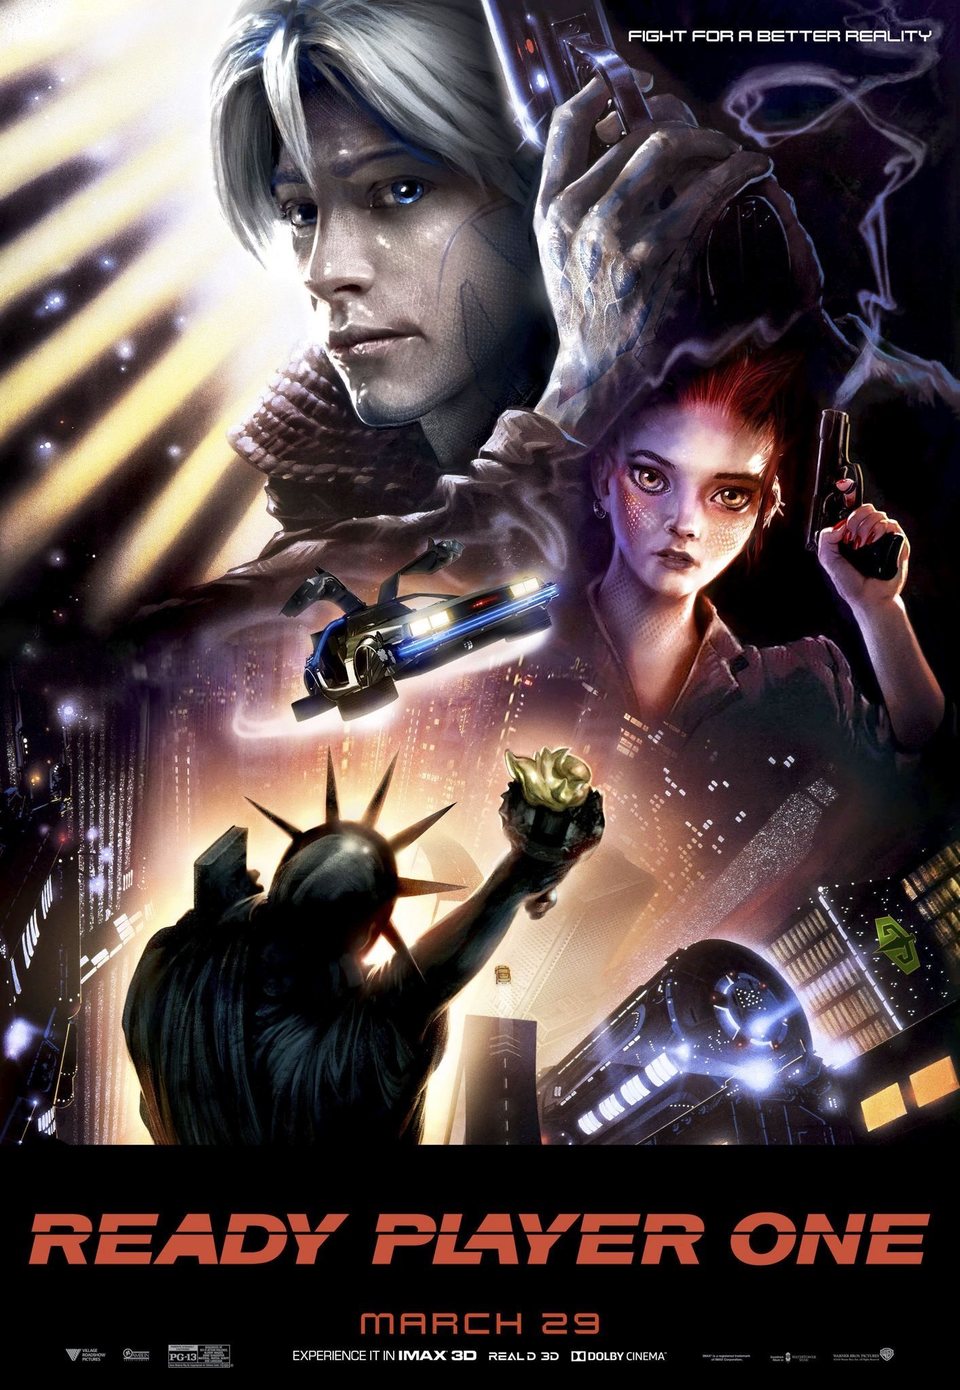 Cartel Ready Player One #10 de 'Ready Player One'